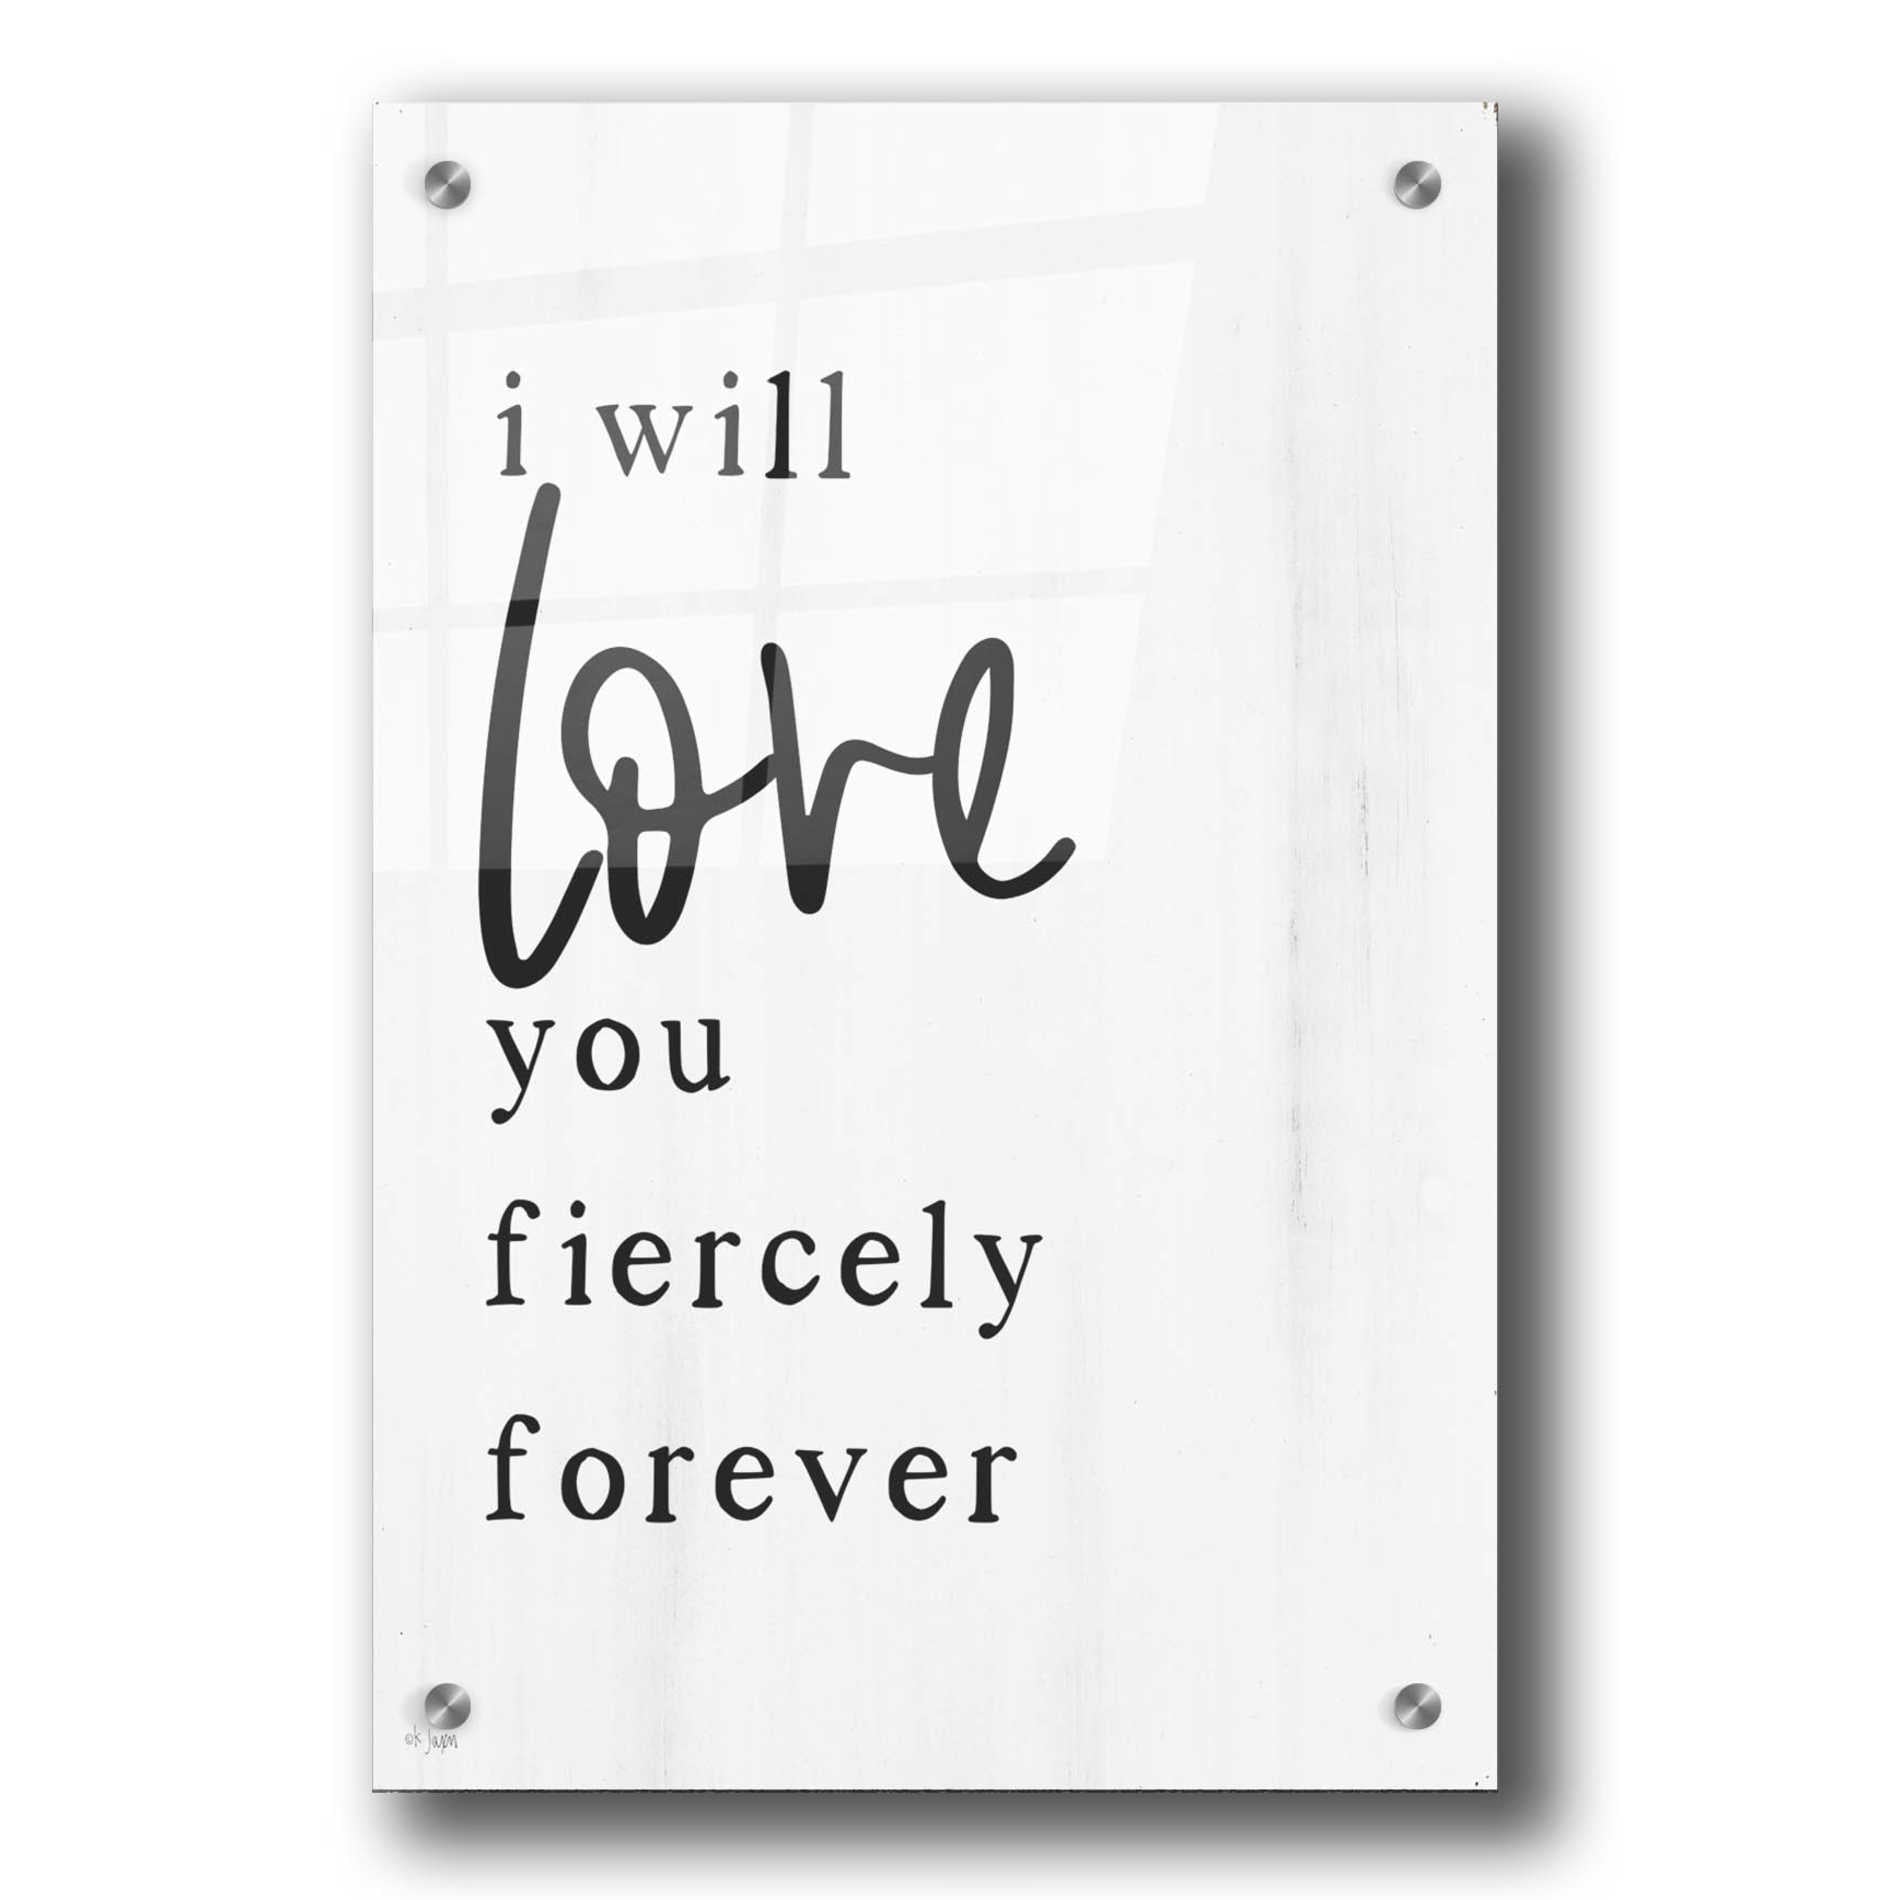 Epic Art 'Love You Fiercely Forever' by Jaxn Blvd, Acrylic Glass Wall Art,24x36